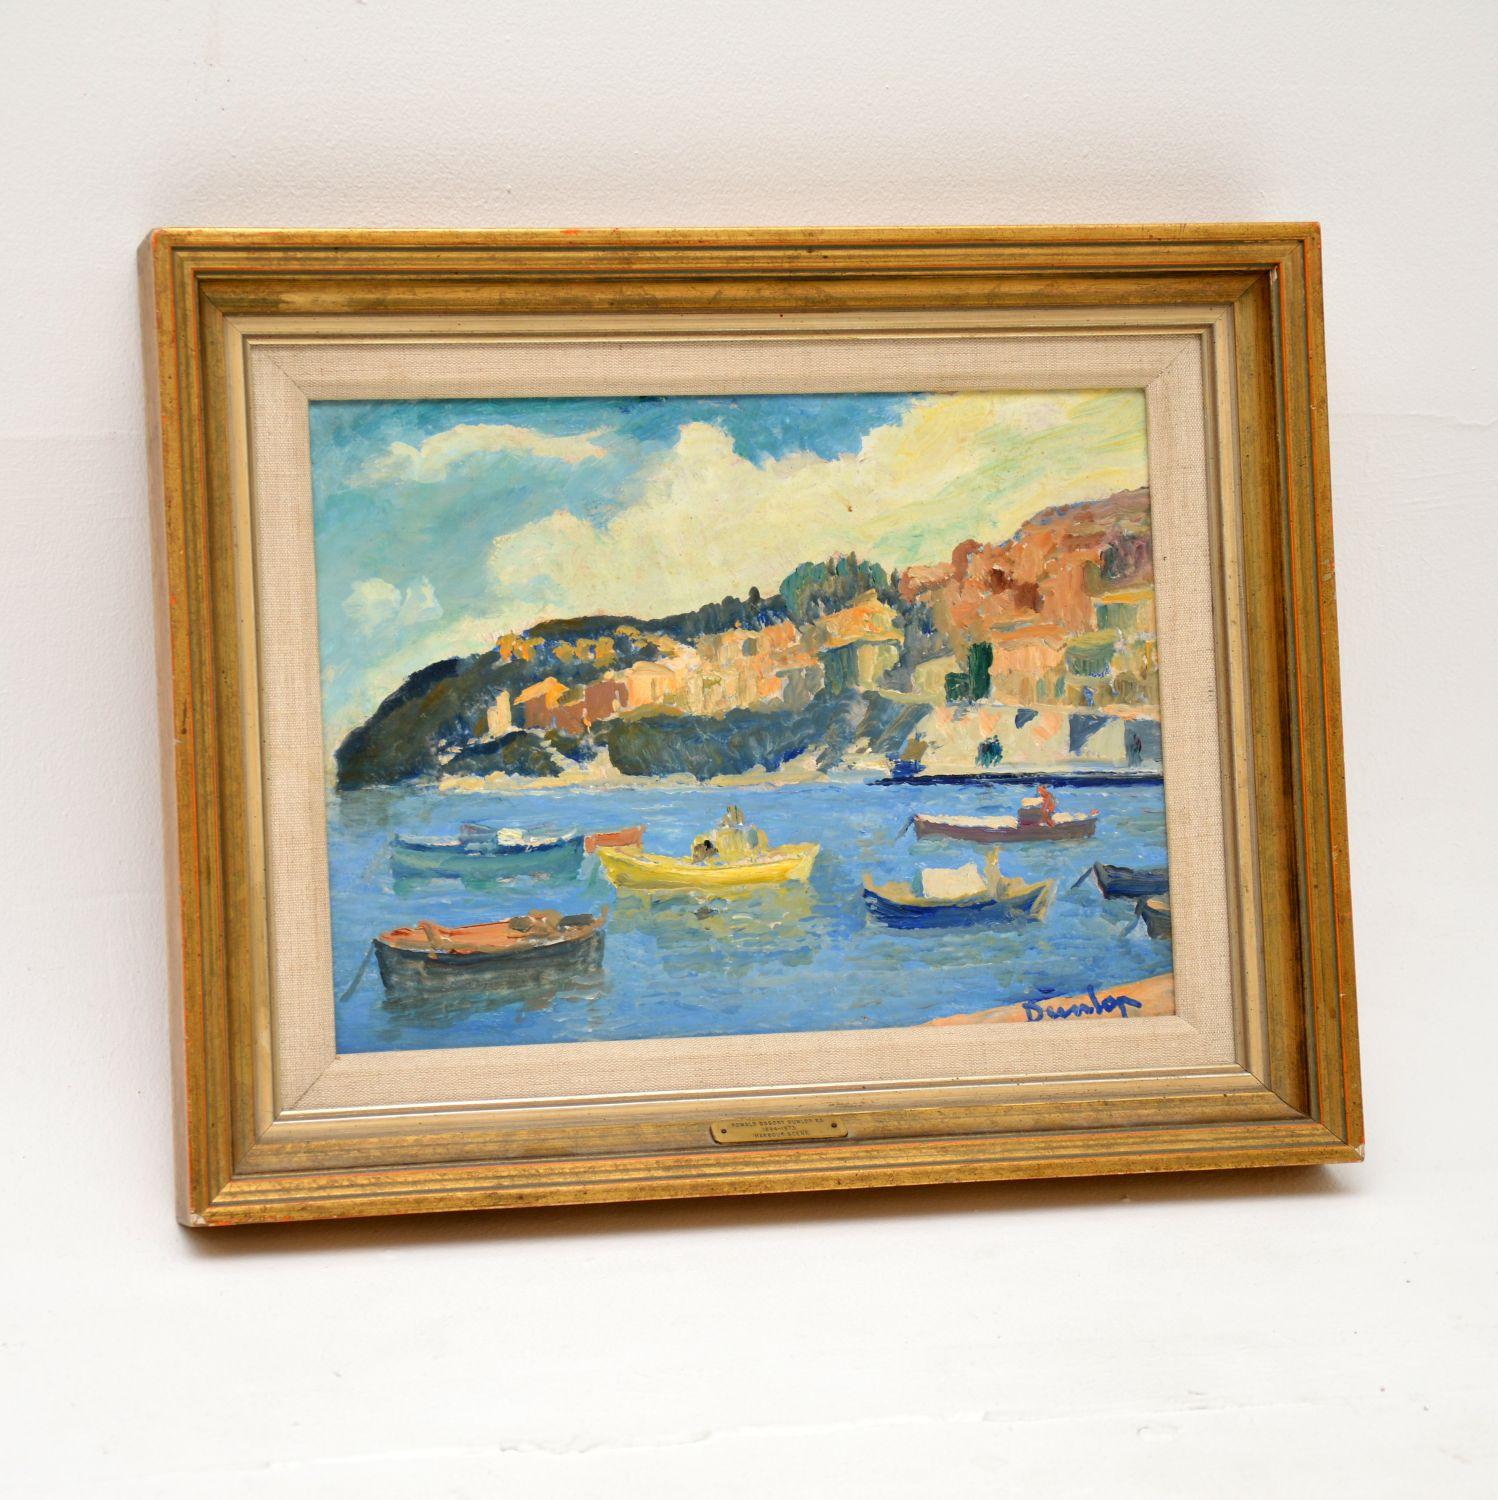 A wonderful vintage oil painting titled “Harbour Scene”, by the important Irish painter and author, Ronald Ossory Dunlop (1895-1973). This would have been painted sometime around the mid-twentieth century.

It is depicts a beautiful landscape of a